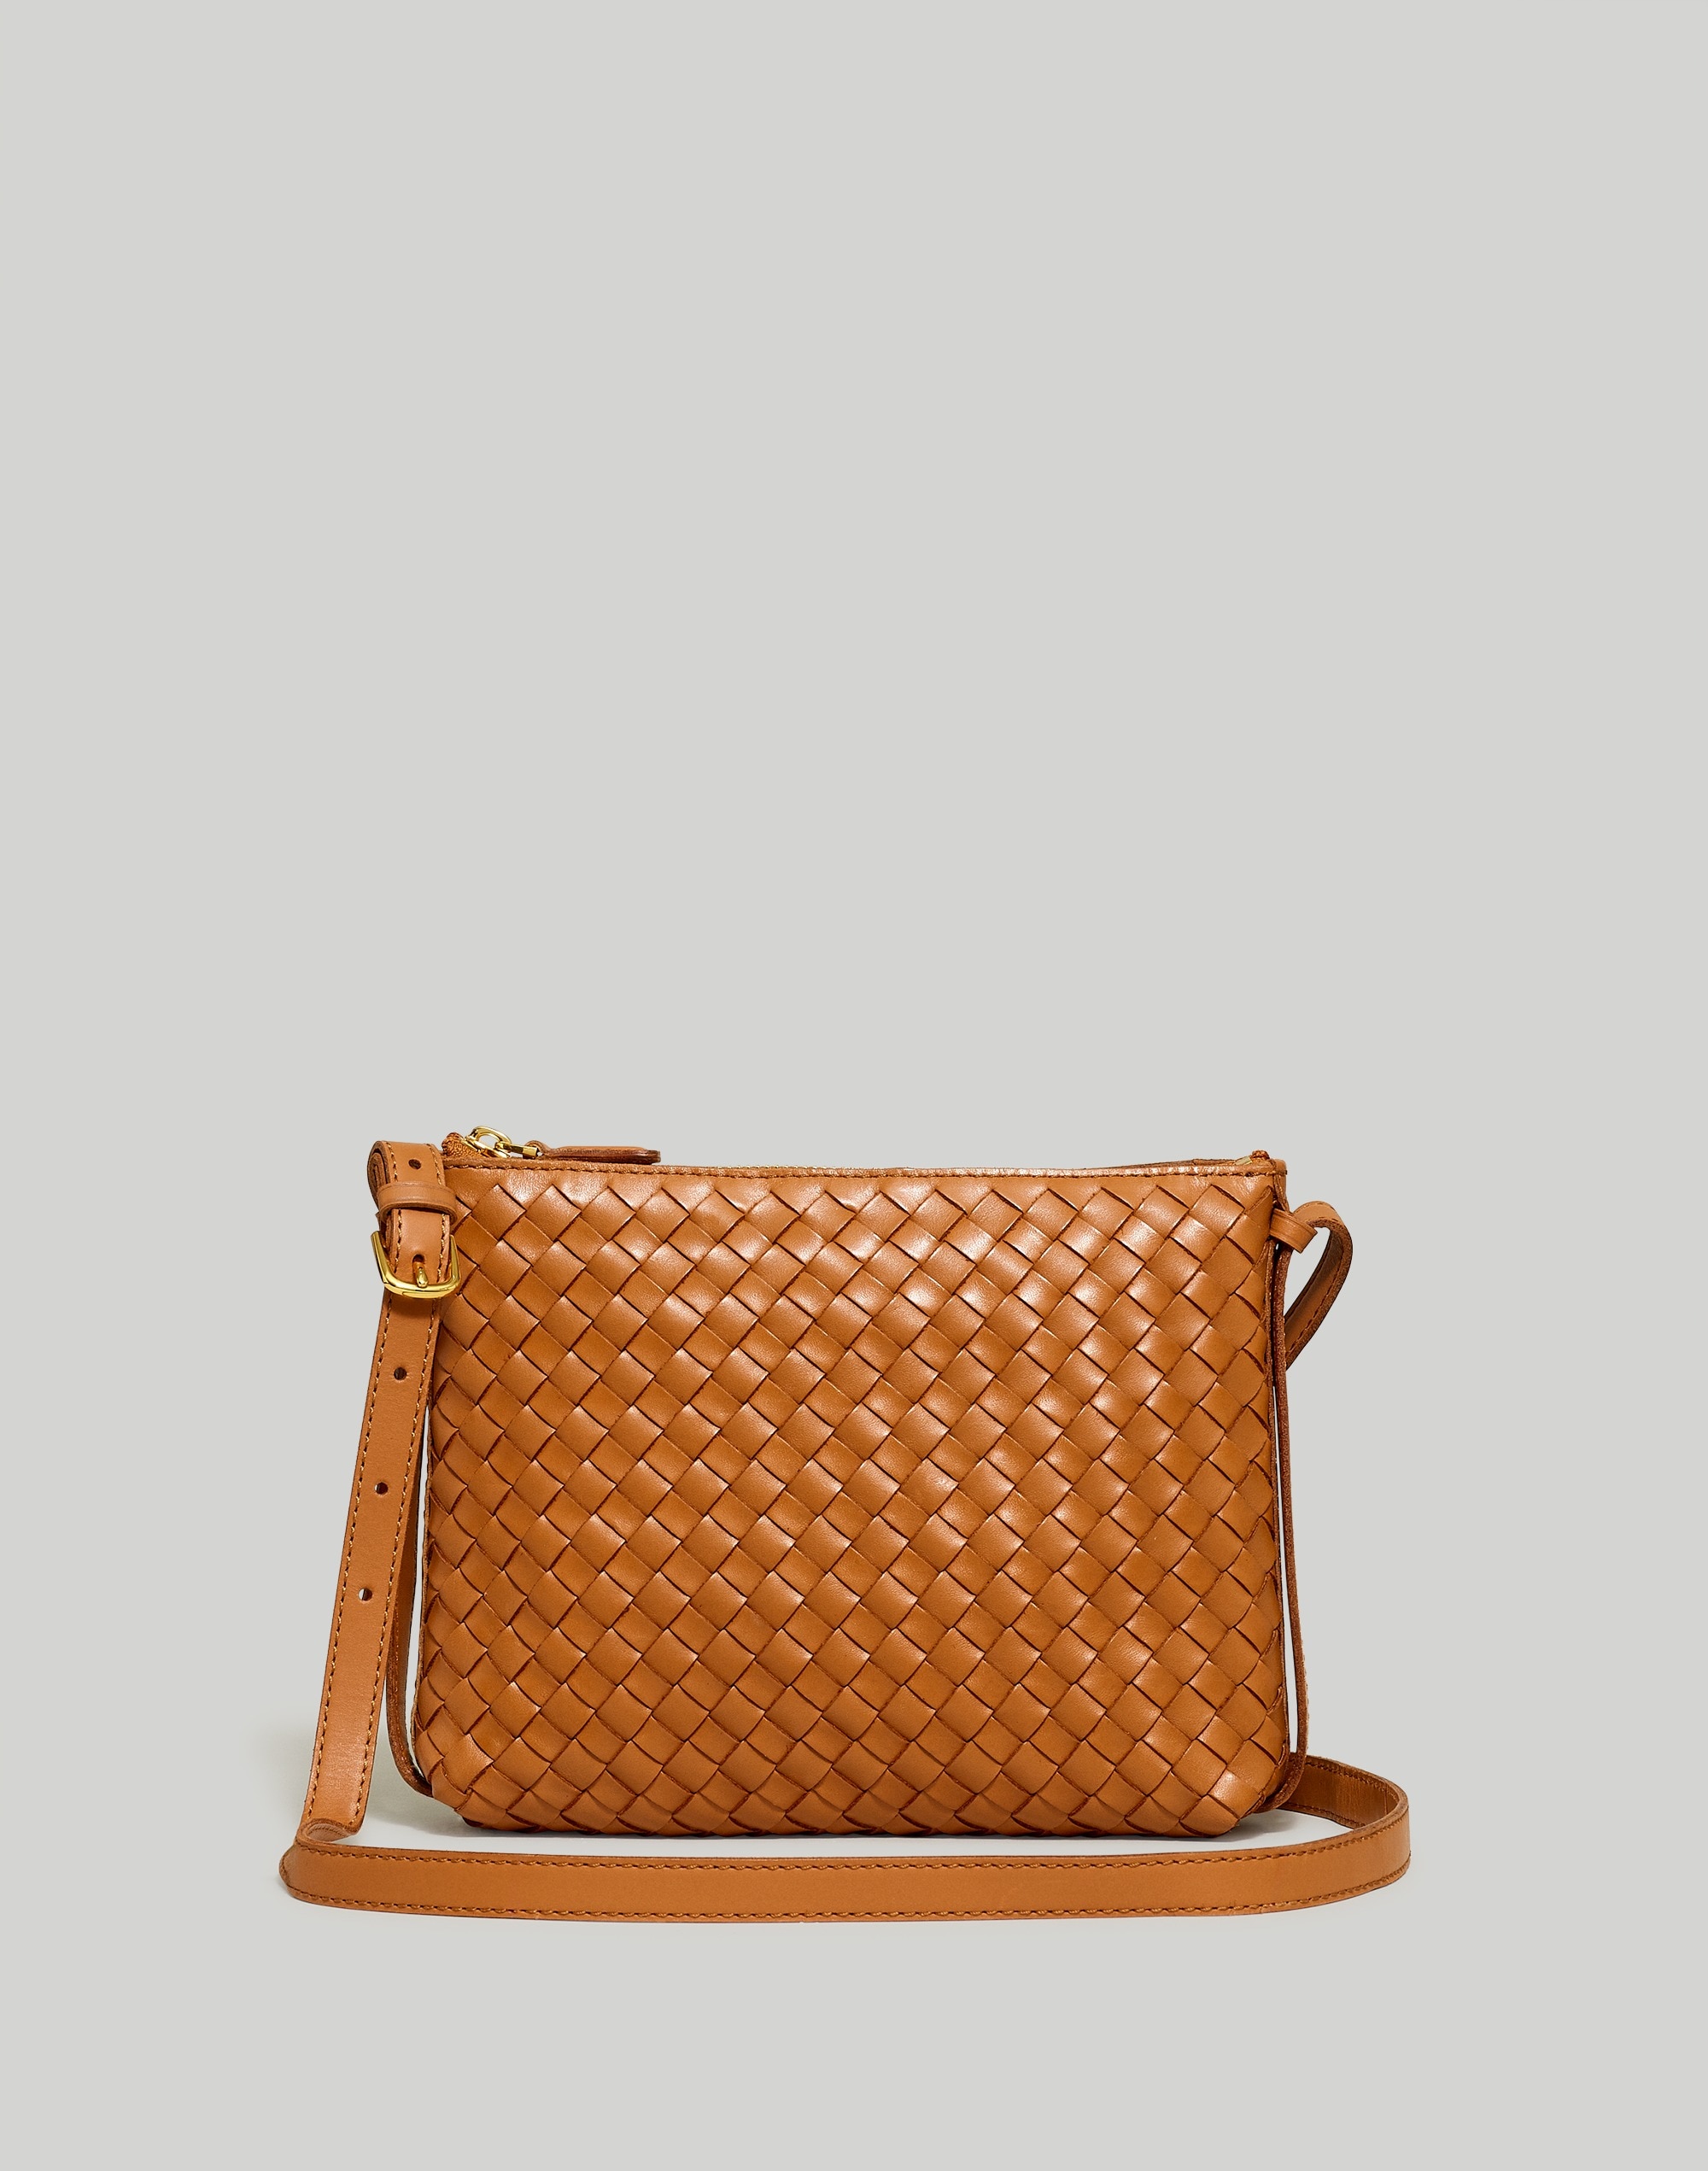 Crossbody Bag in Handwoven Leather